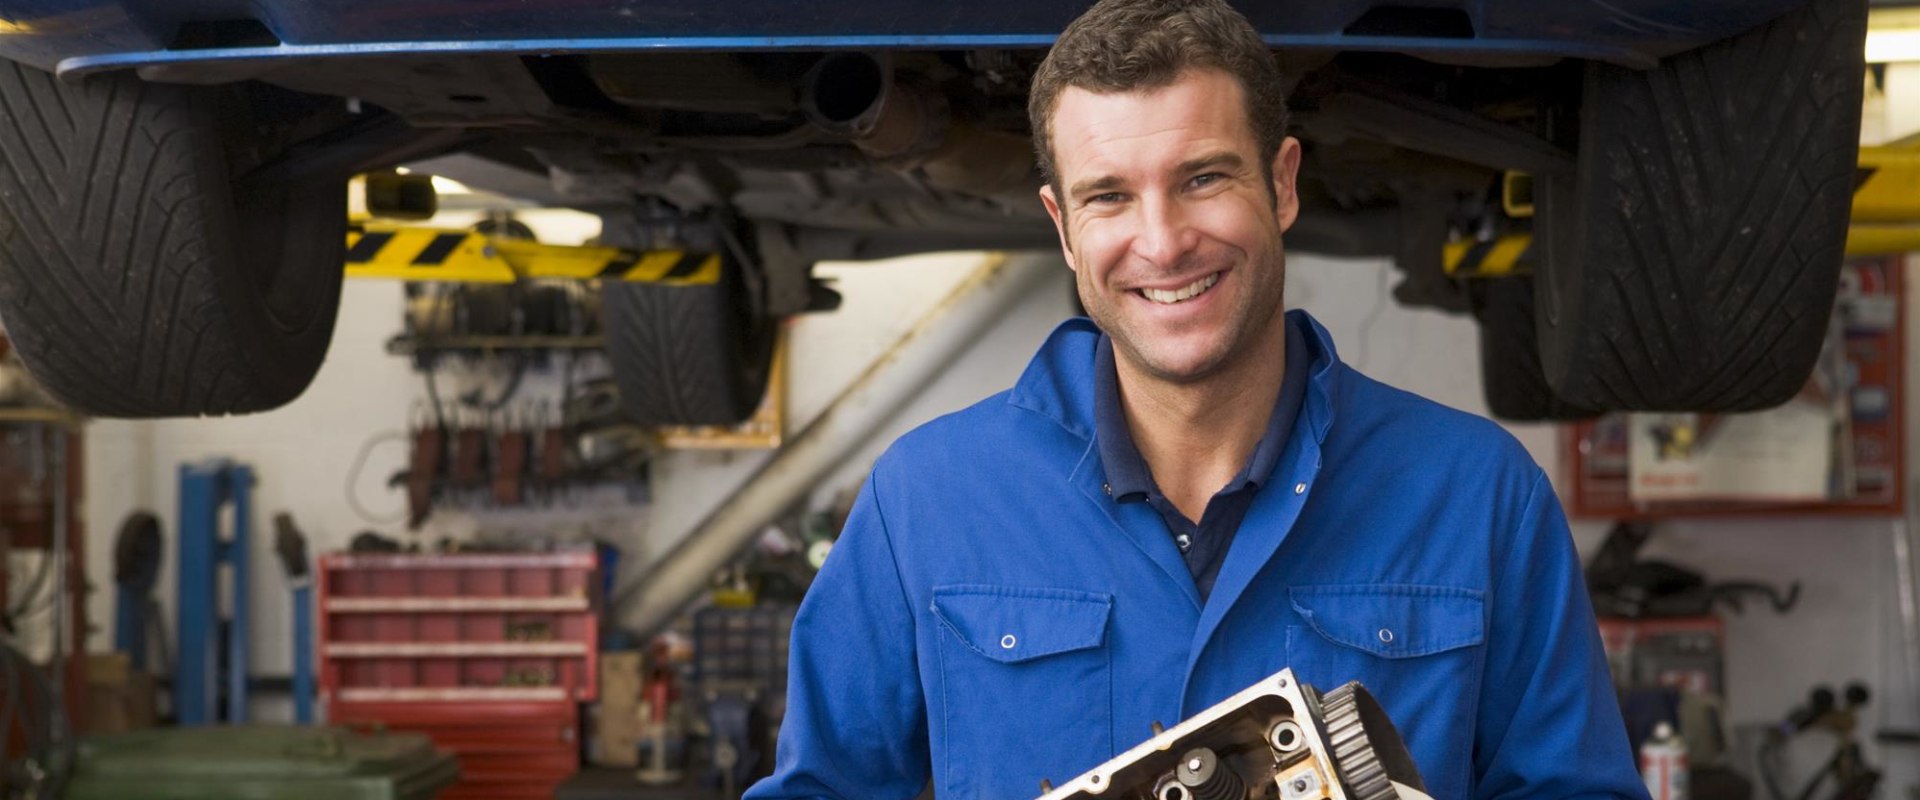 Basic Safety Practices for Auto Repair